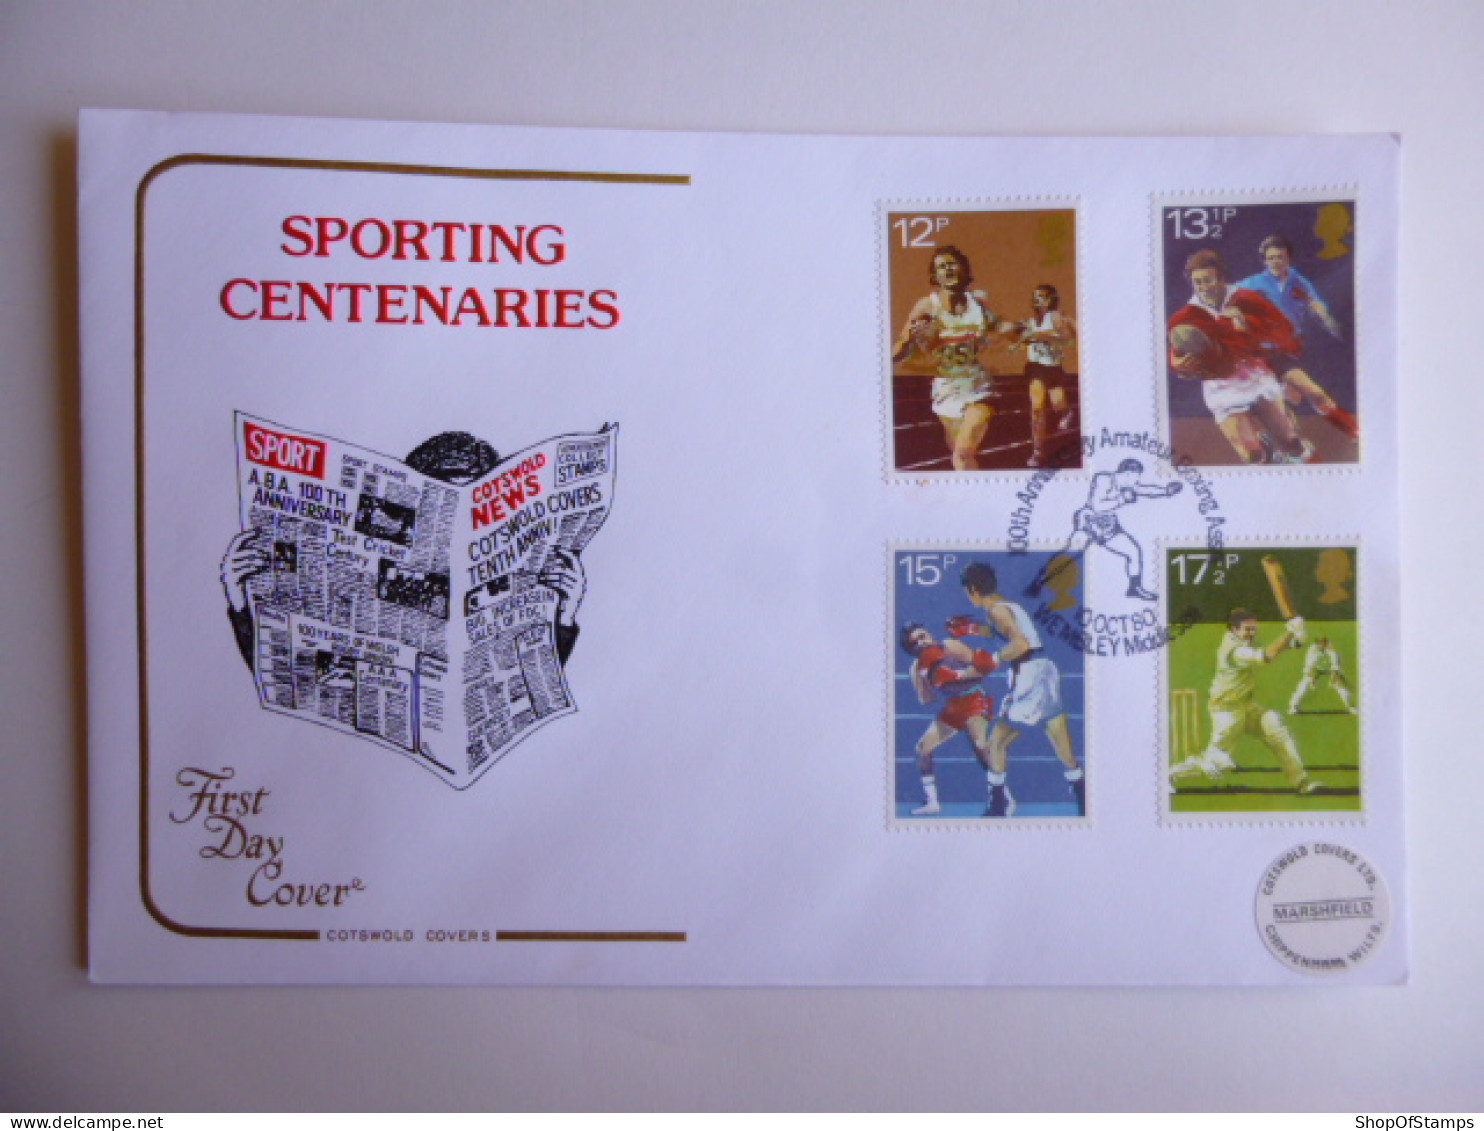 GREAT BRITAIN SG 1134-37 SPORTS CENTENARIES   FDC WEMBLEY - Unclassified